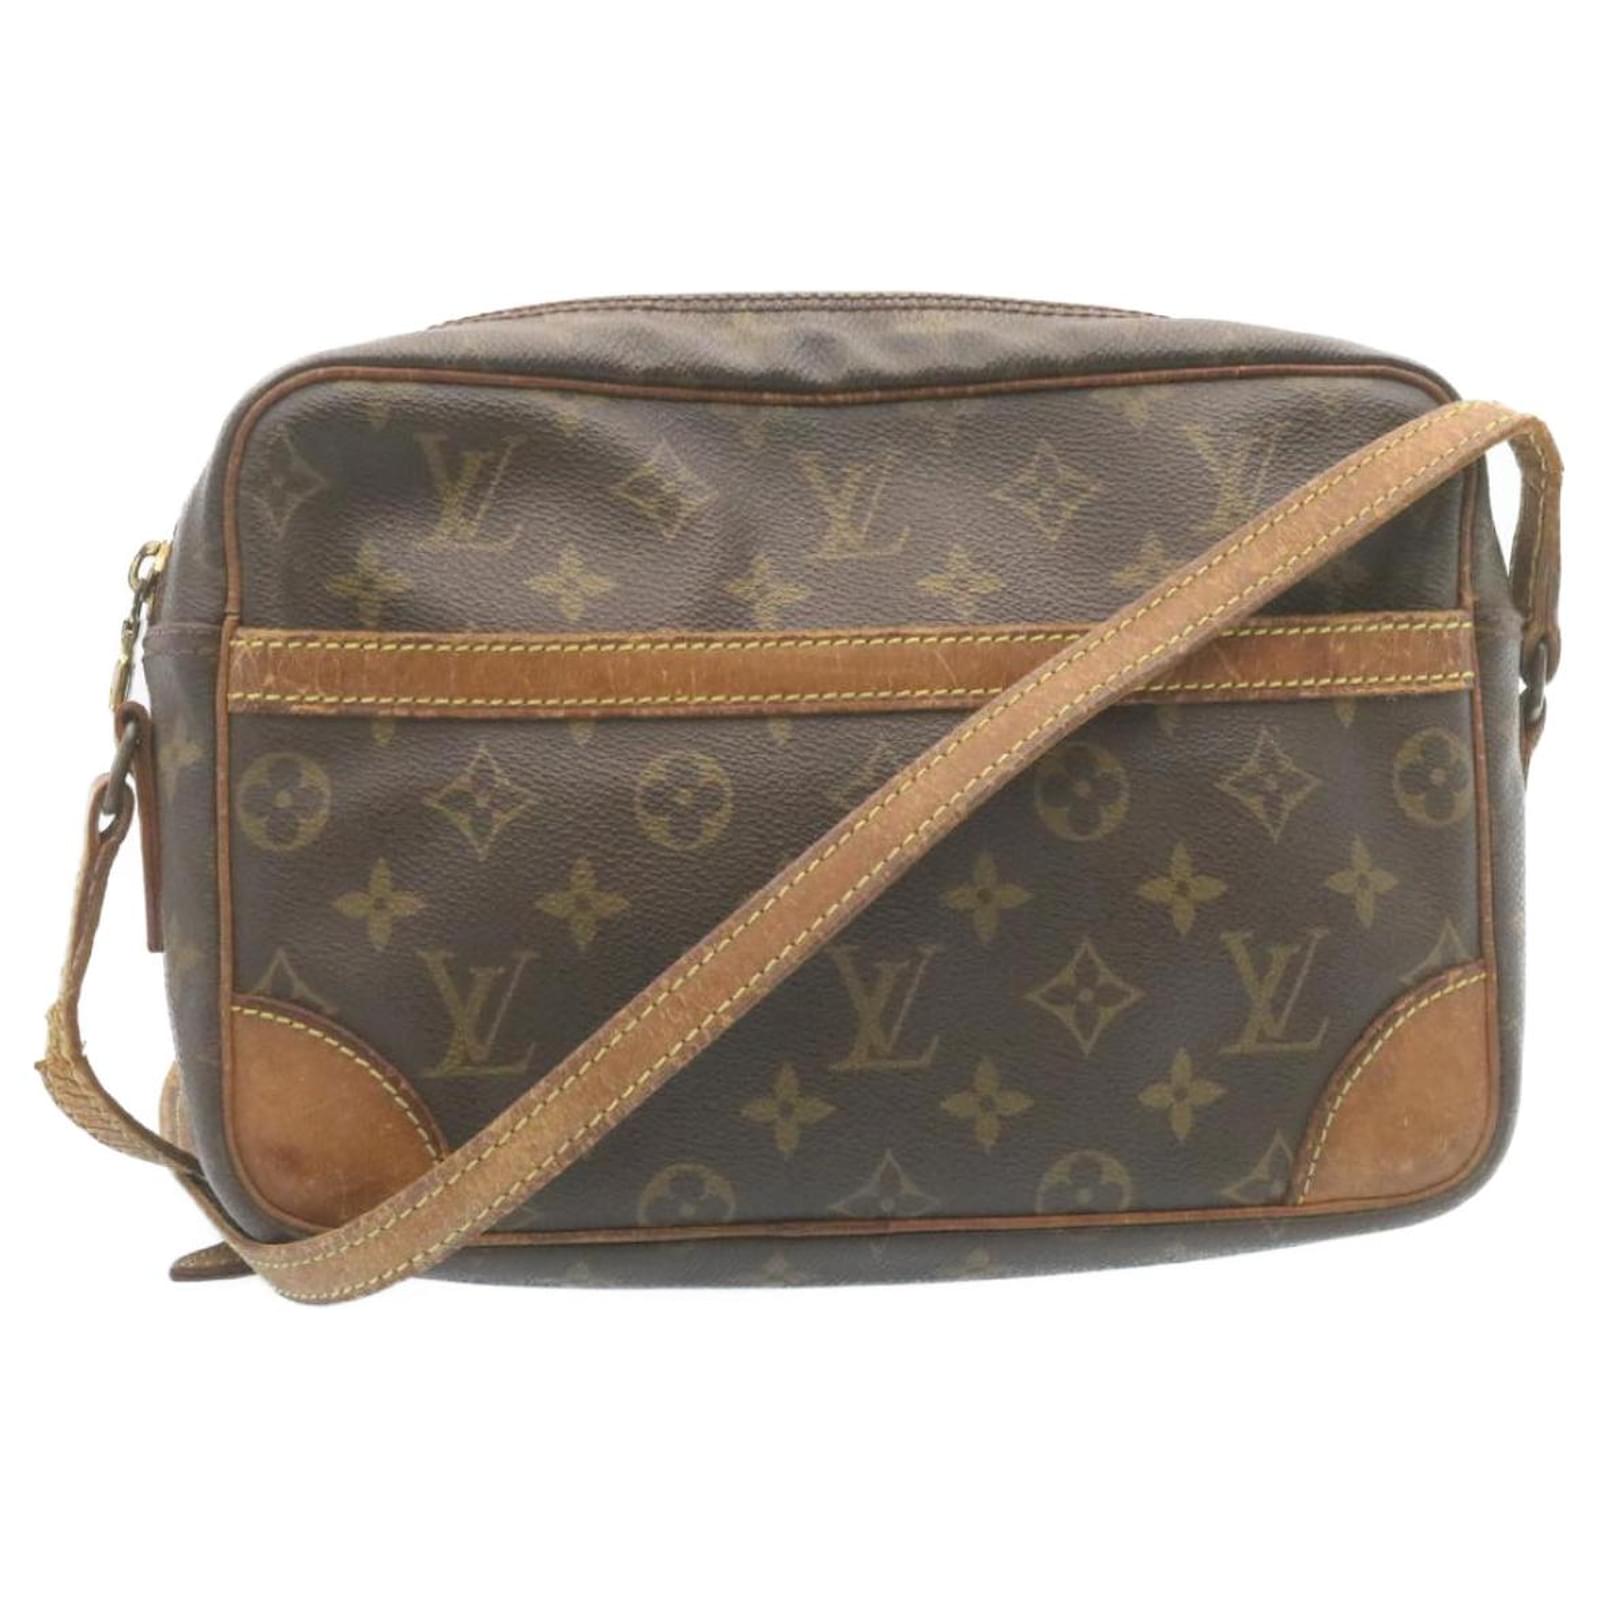 Vintage Louis Vuitton Trocadero Bag With Monogram From the 